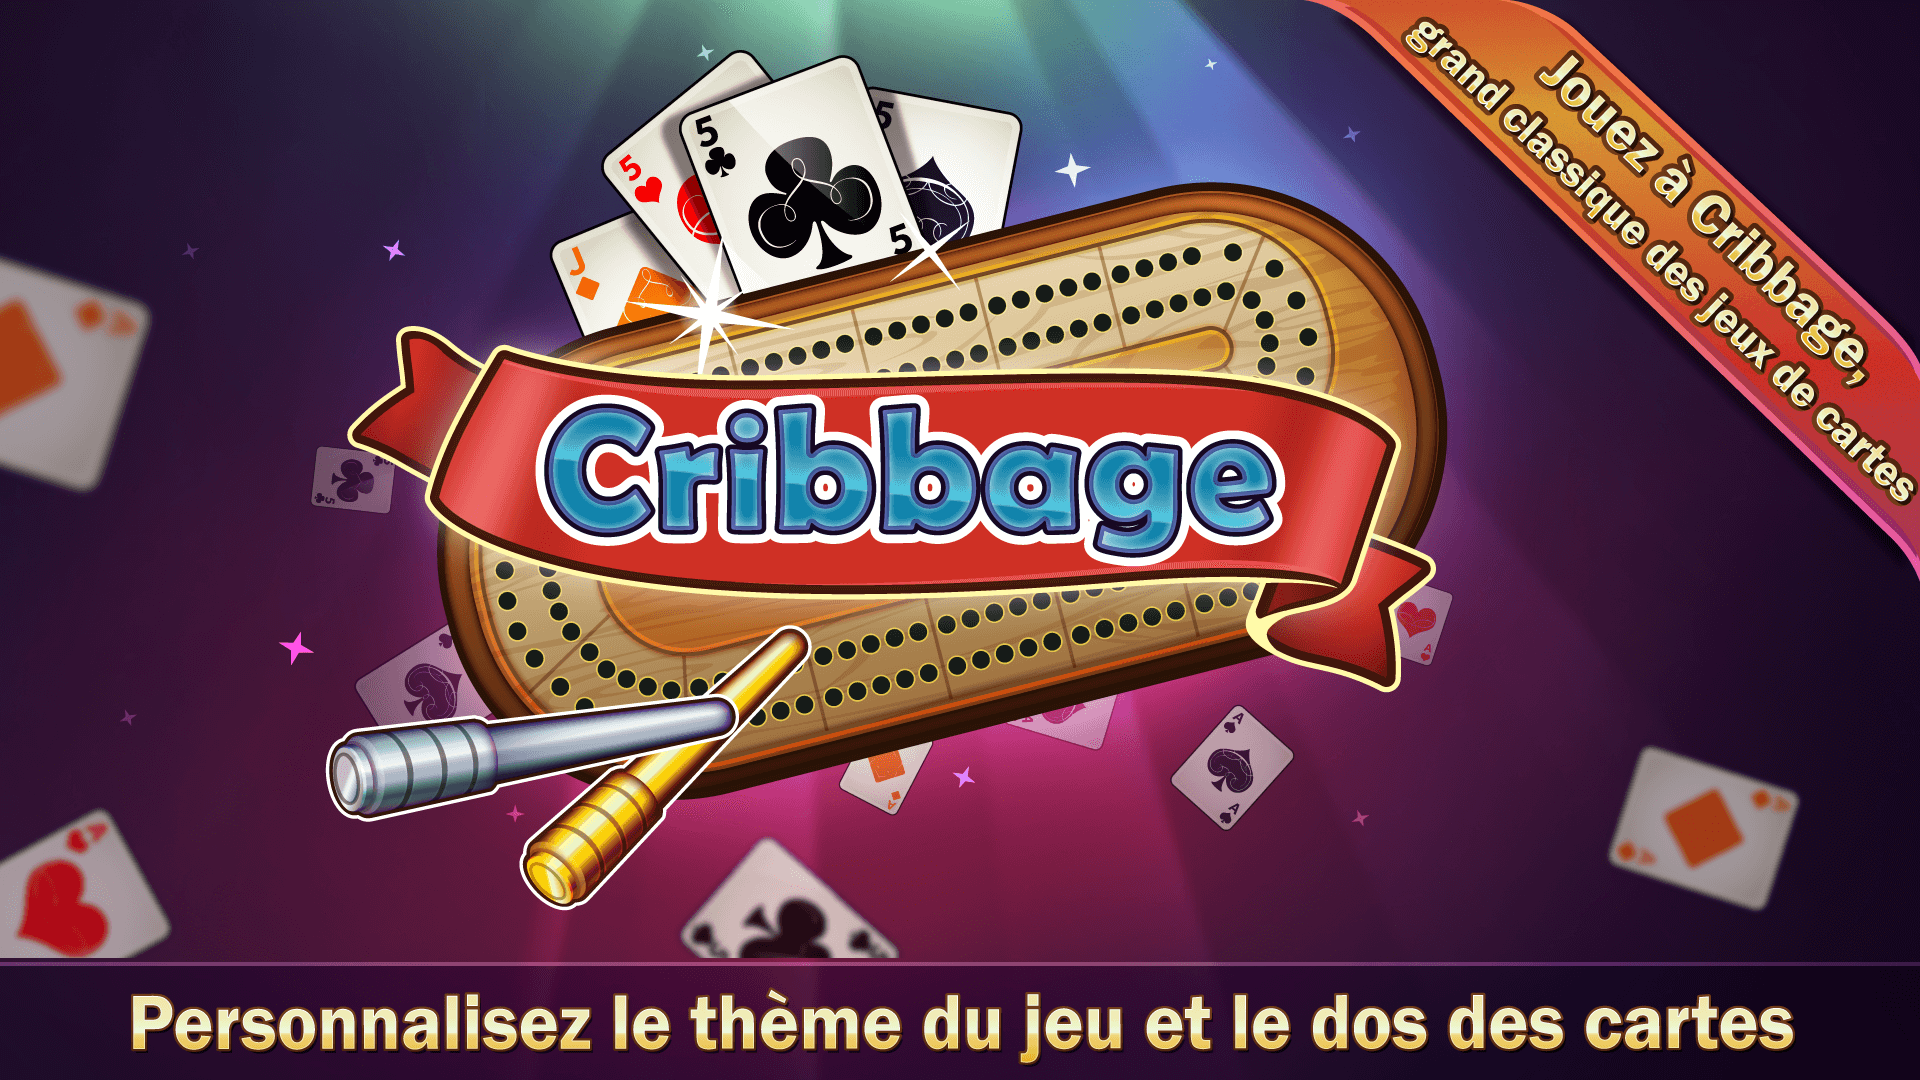 Android application Cribbage Deluxe screenshort